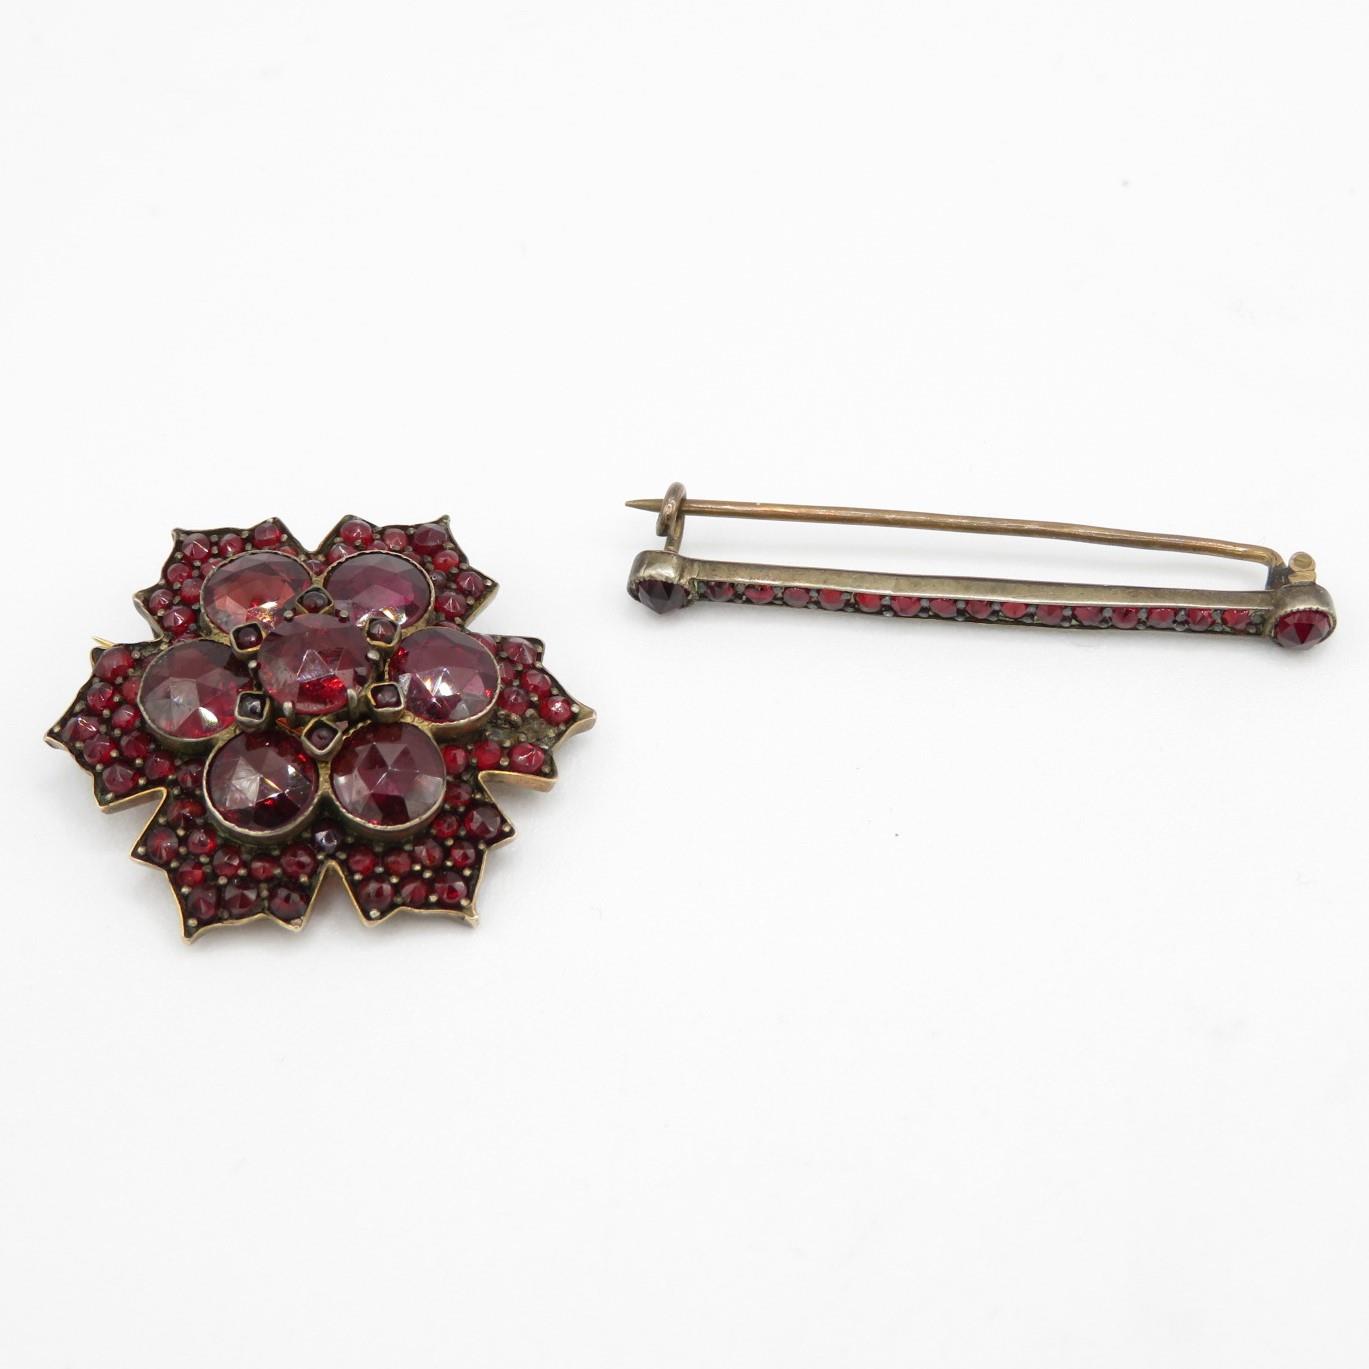 Two antique low carat Bohemian Garnet brooches (7g)